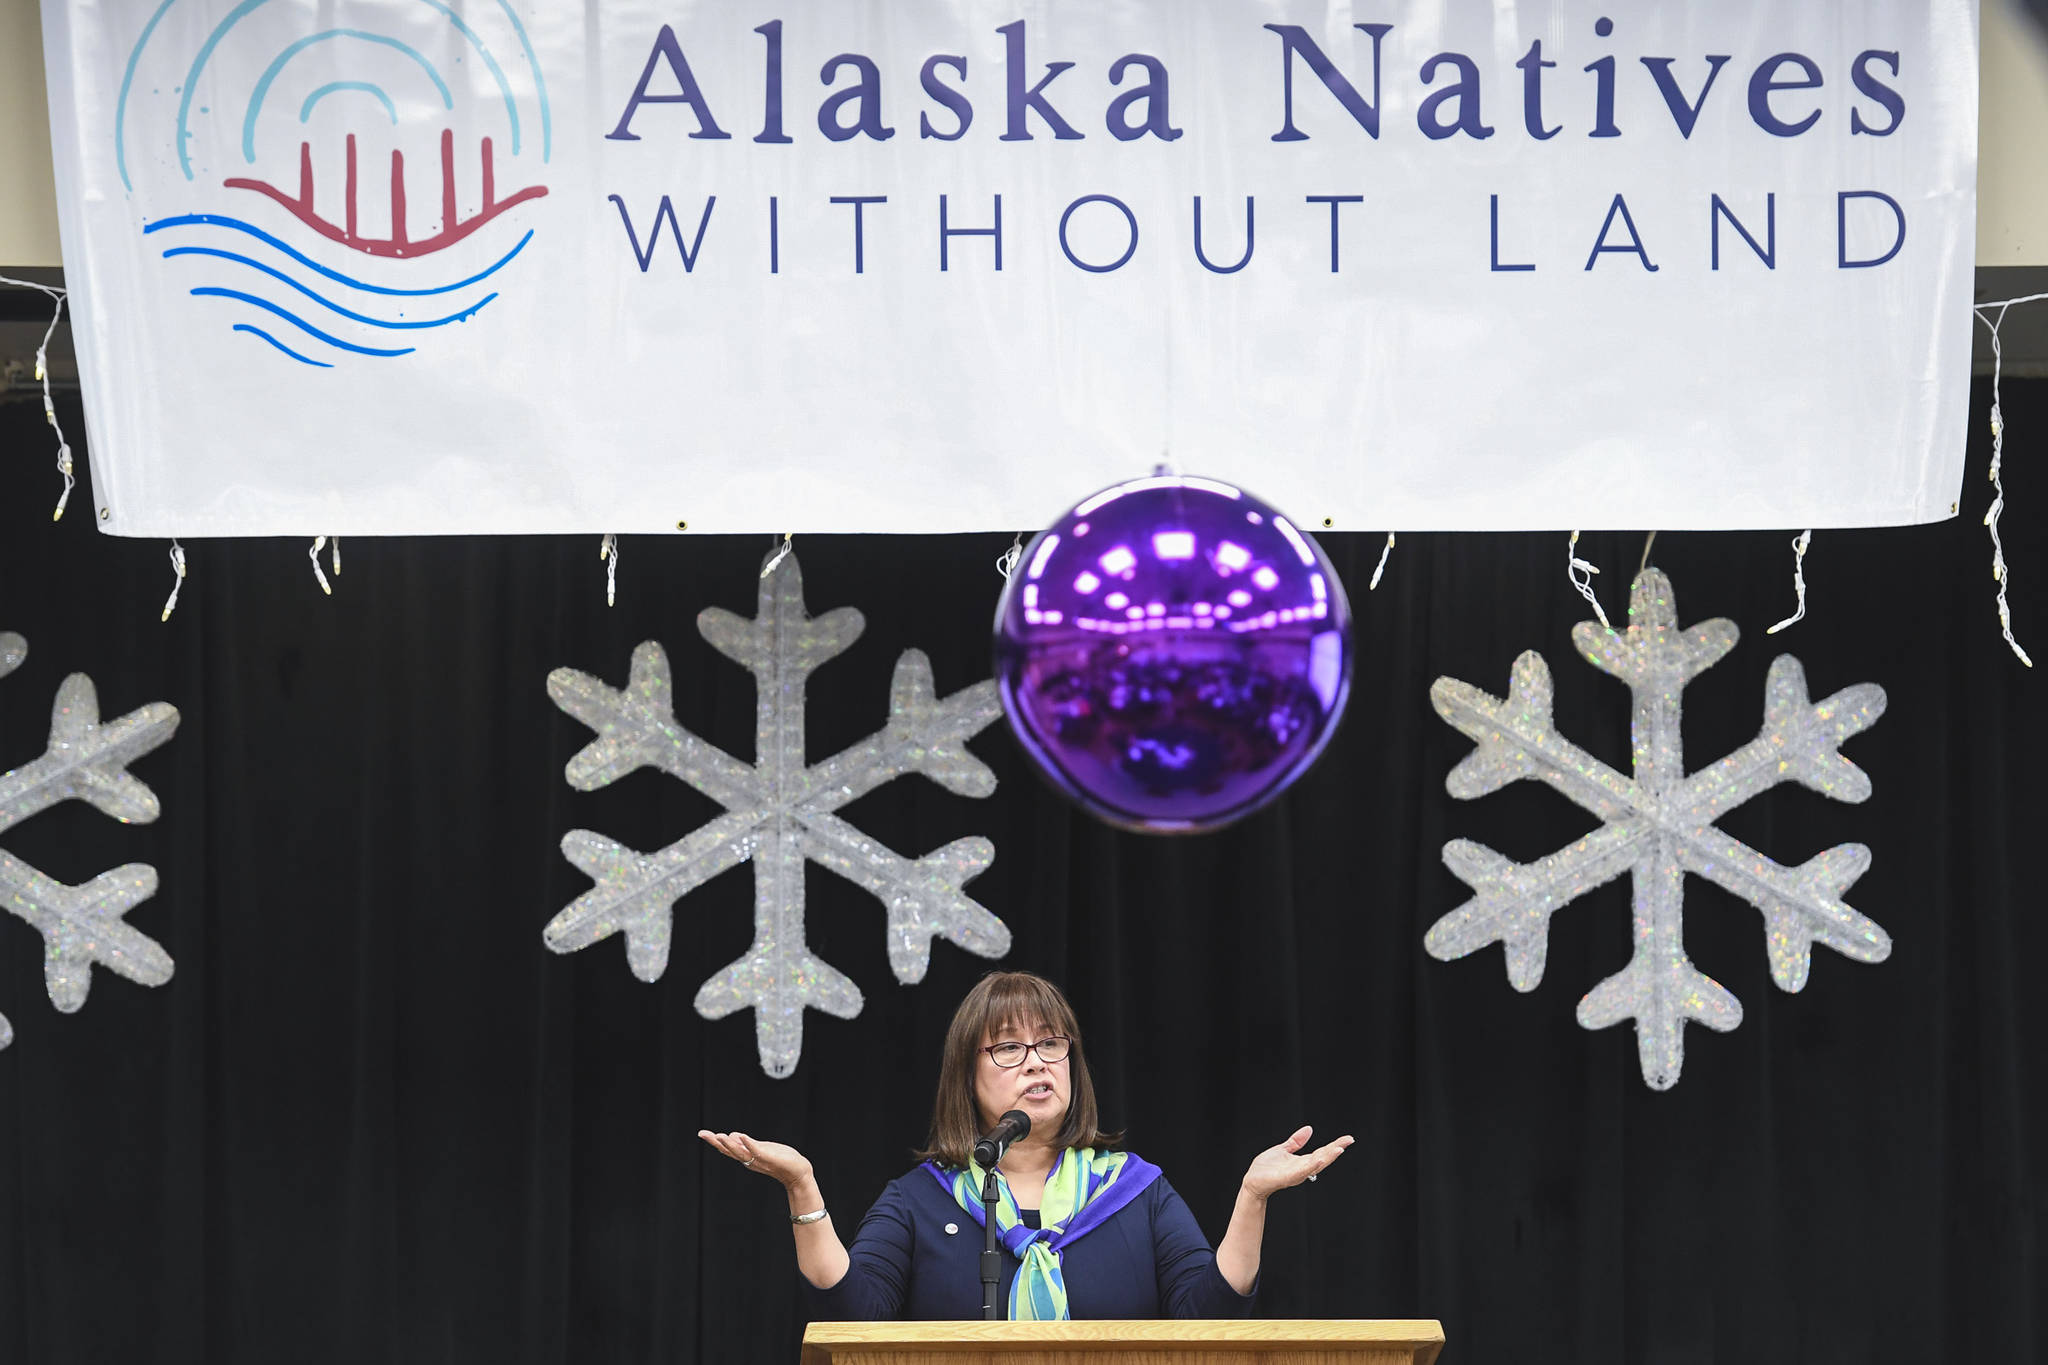 Cecilia Tavoliero of Petersburg speaks during a presentation about communities left out of the Alaska Native Claims Settlement Act at Elizabeth Peratrovich Hall on Saturday, Dec. 14, 2019. (Michael Penn | Juneau Empire)